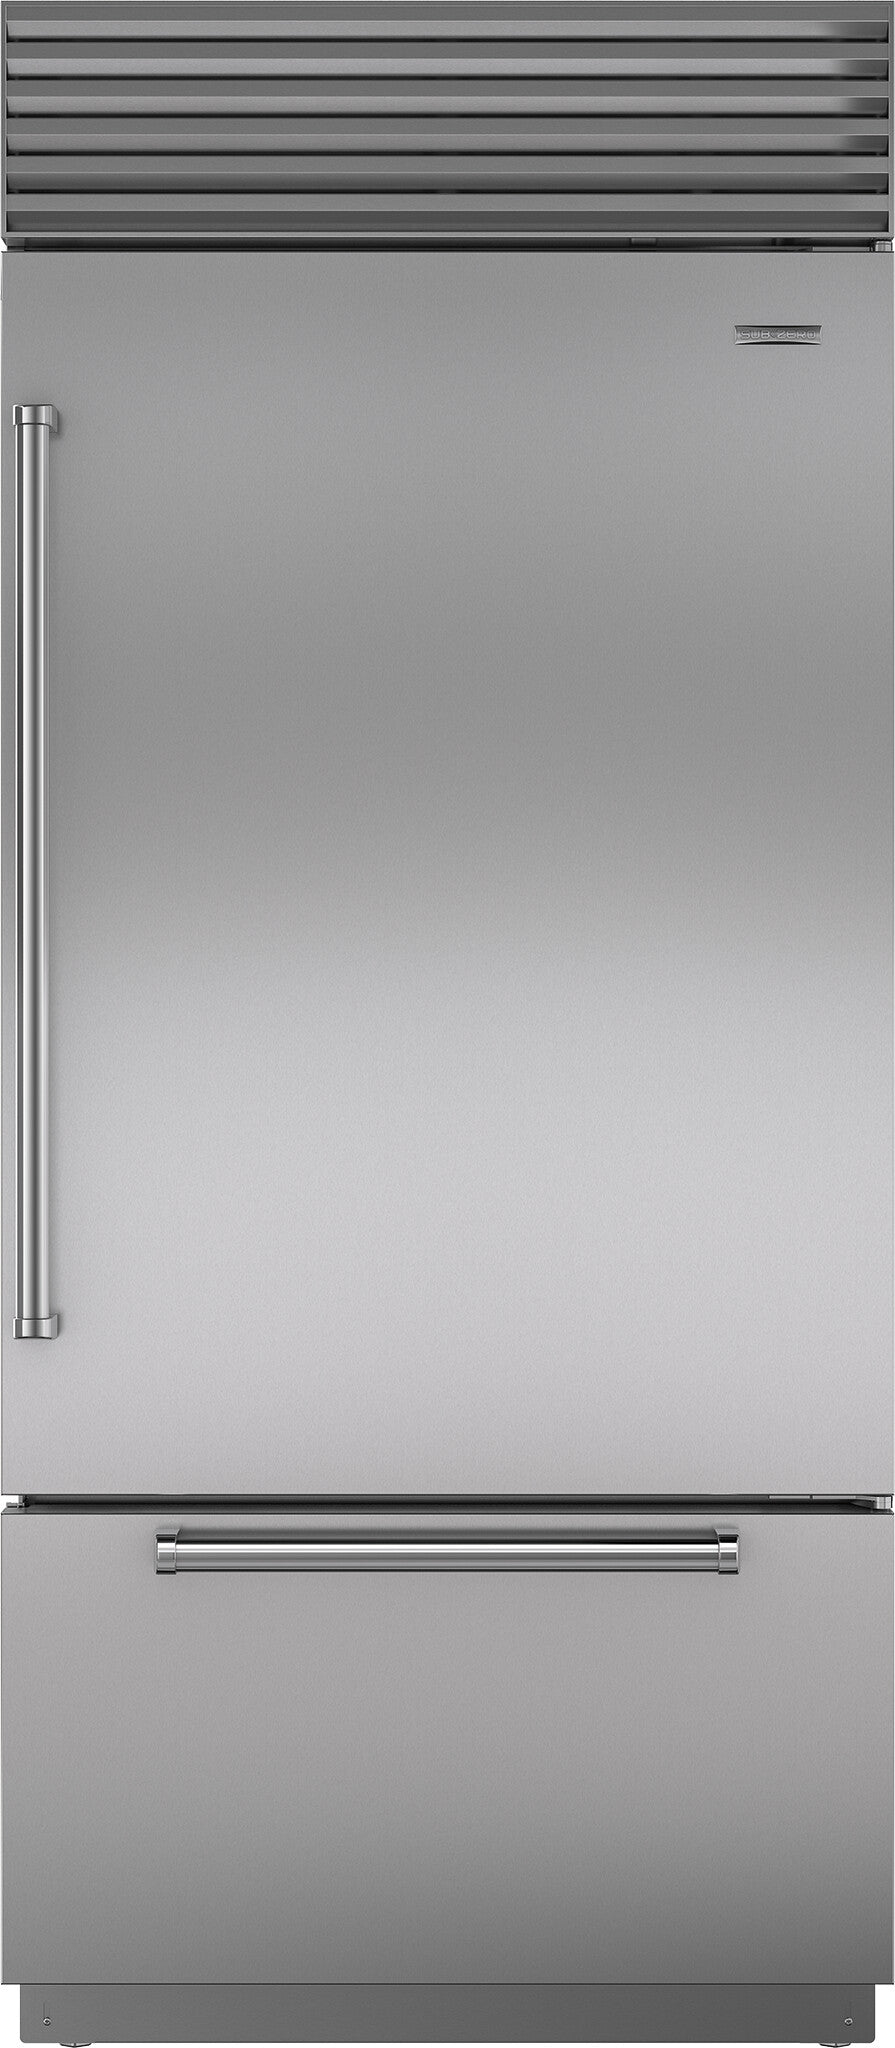 Sub-Zero - 36 Inch 20.7 cu. ft Built In / Integrated Bottom Mount Refrigerator in Stainless - CL3650UID/S/P/R